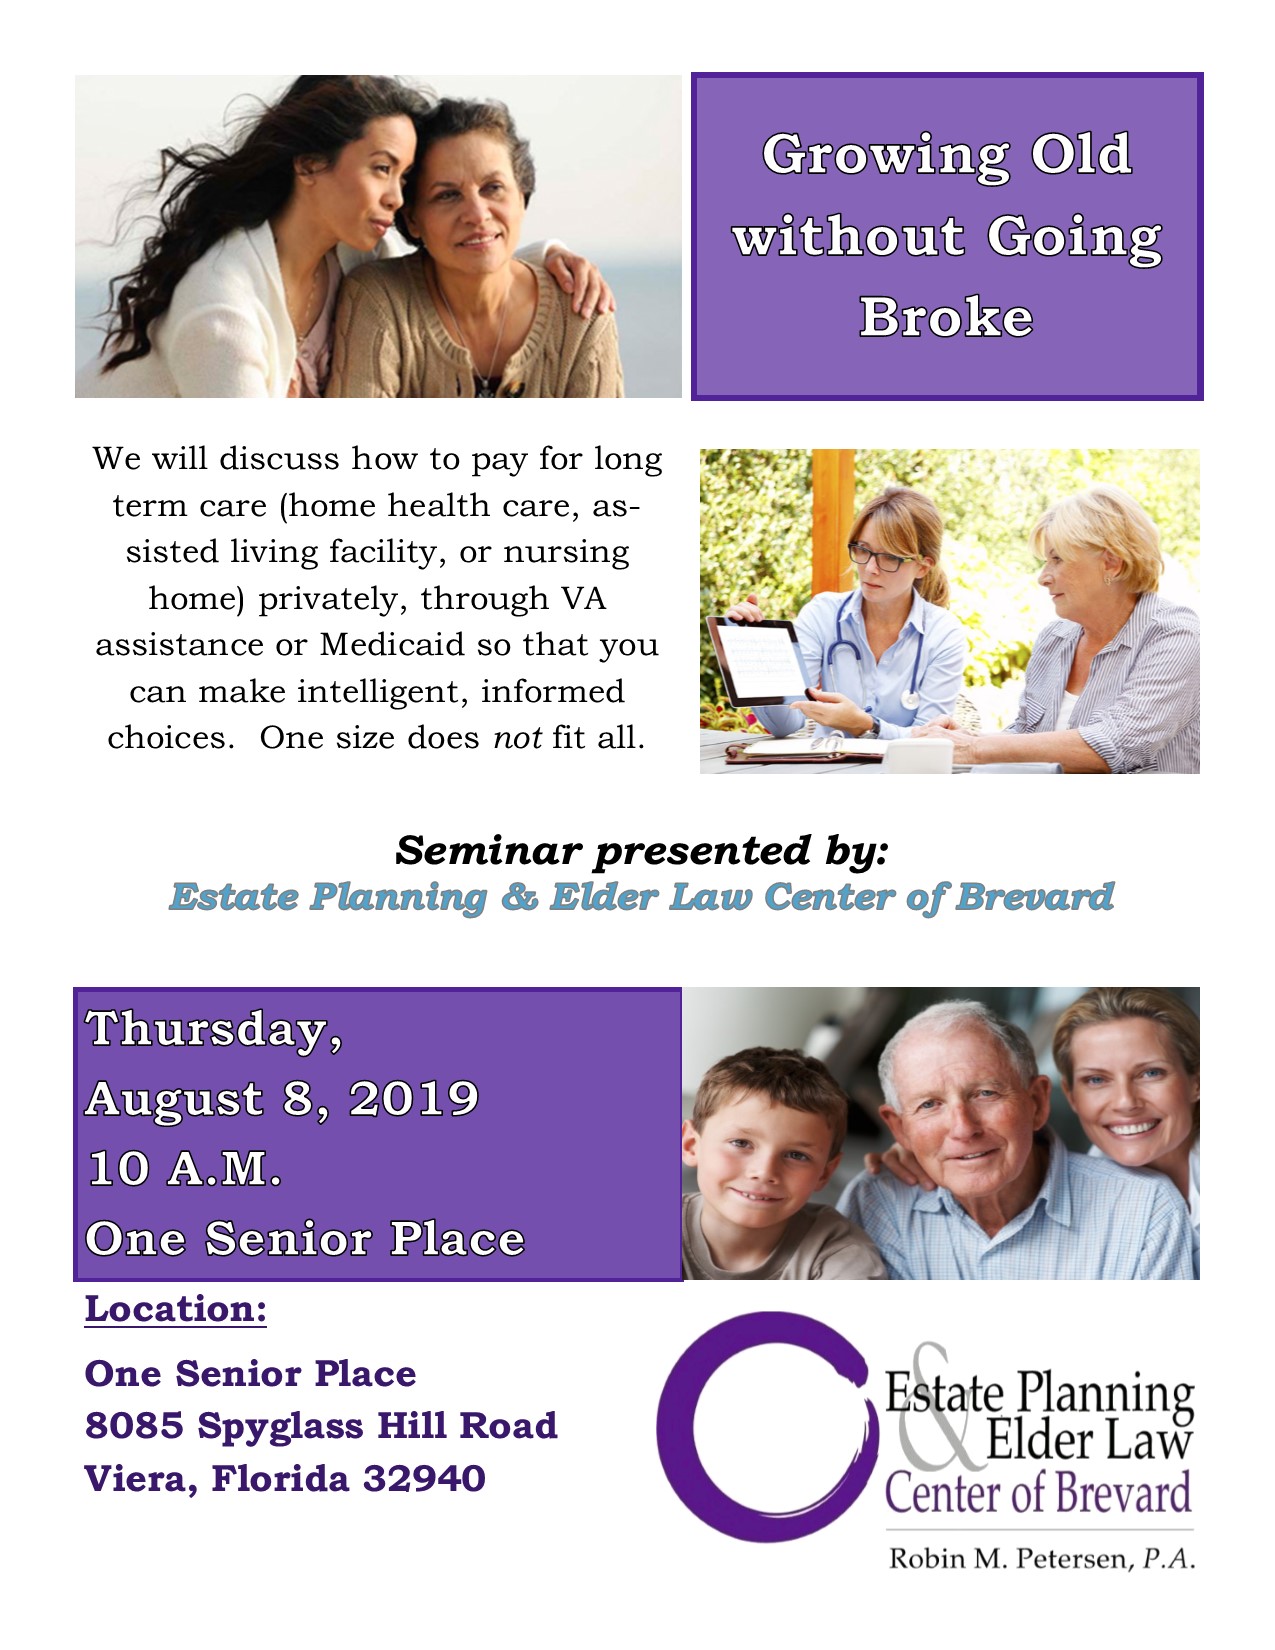 Growing Old without Going Broke presented by Estate Planning & Elder Law Center of Brevard